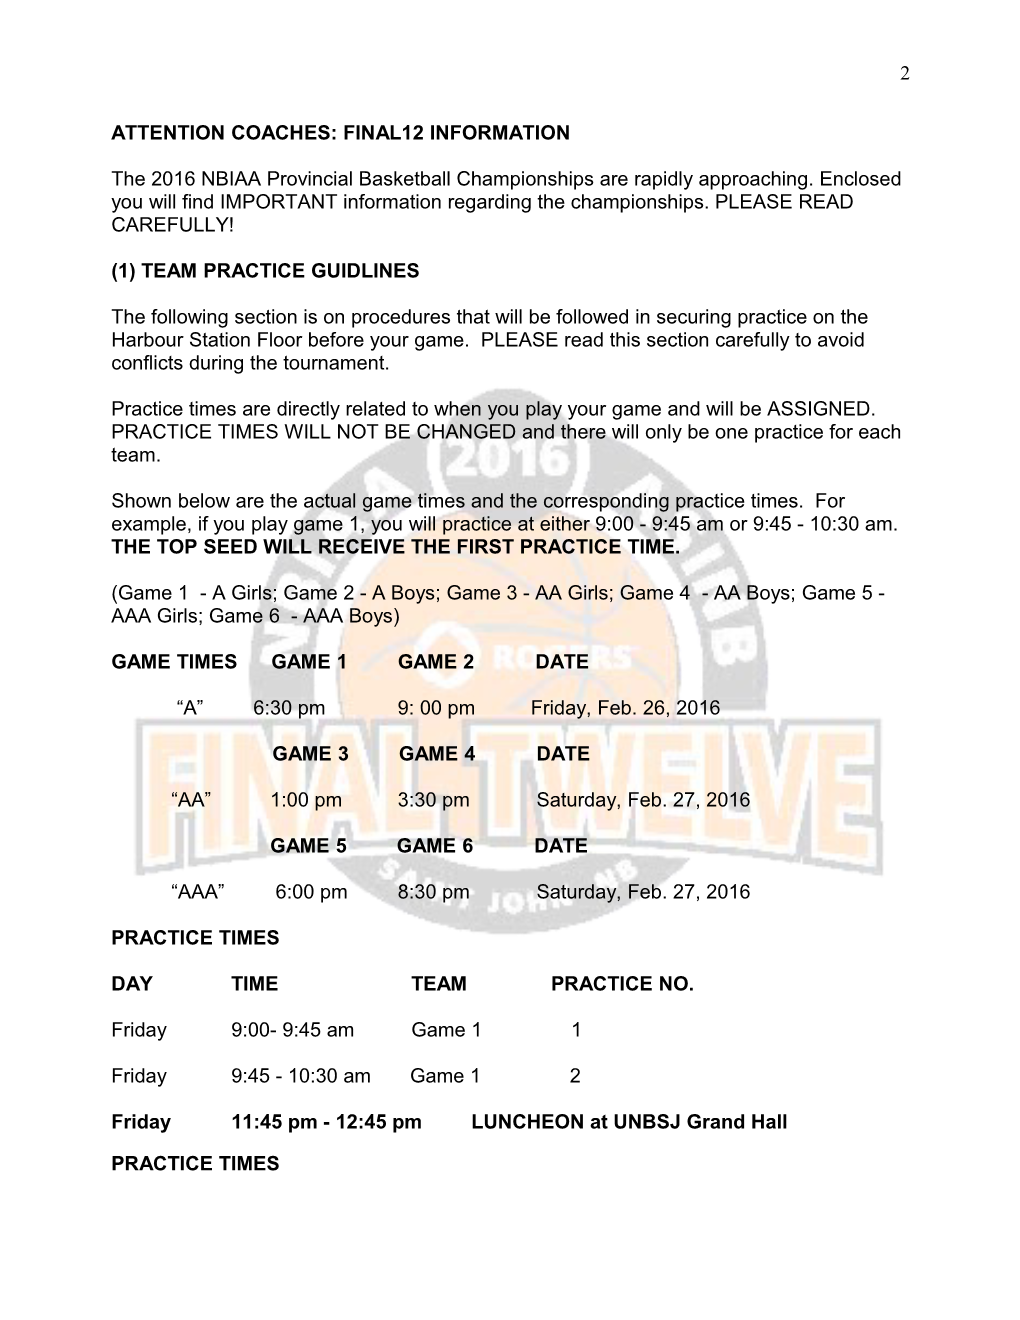 Attention Coaches: Final 12 Information, Please Read Carefully